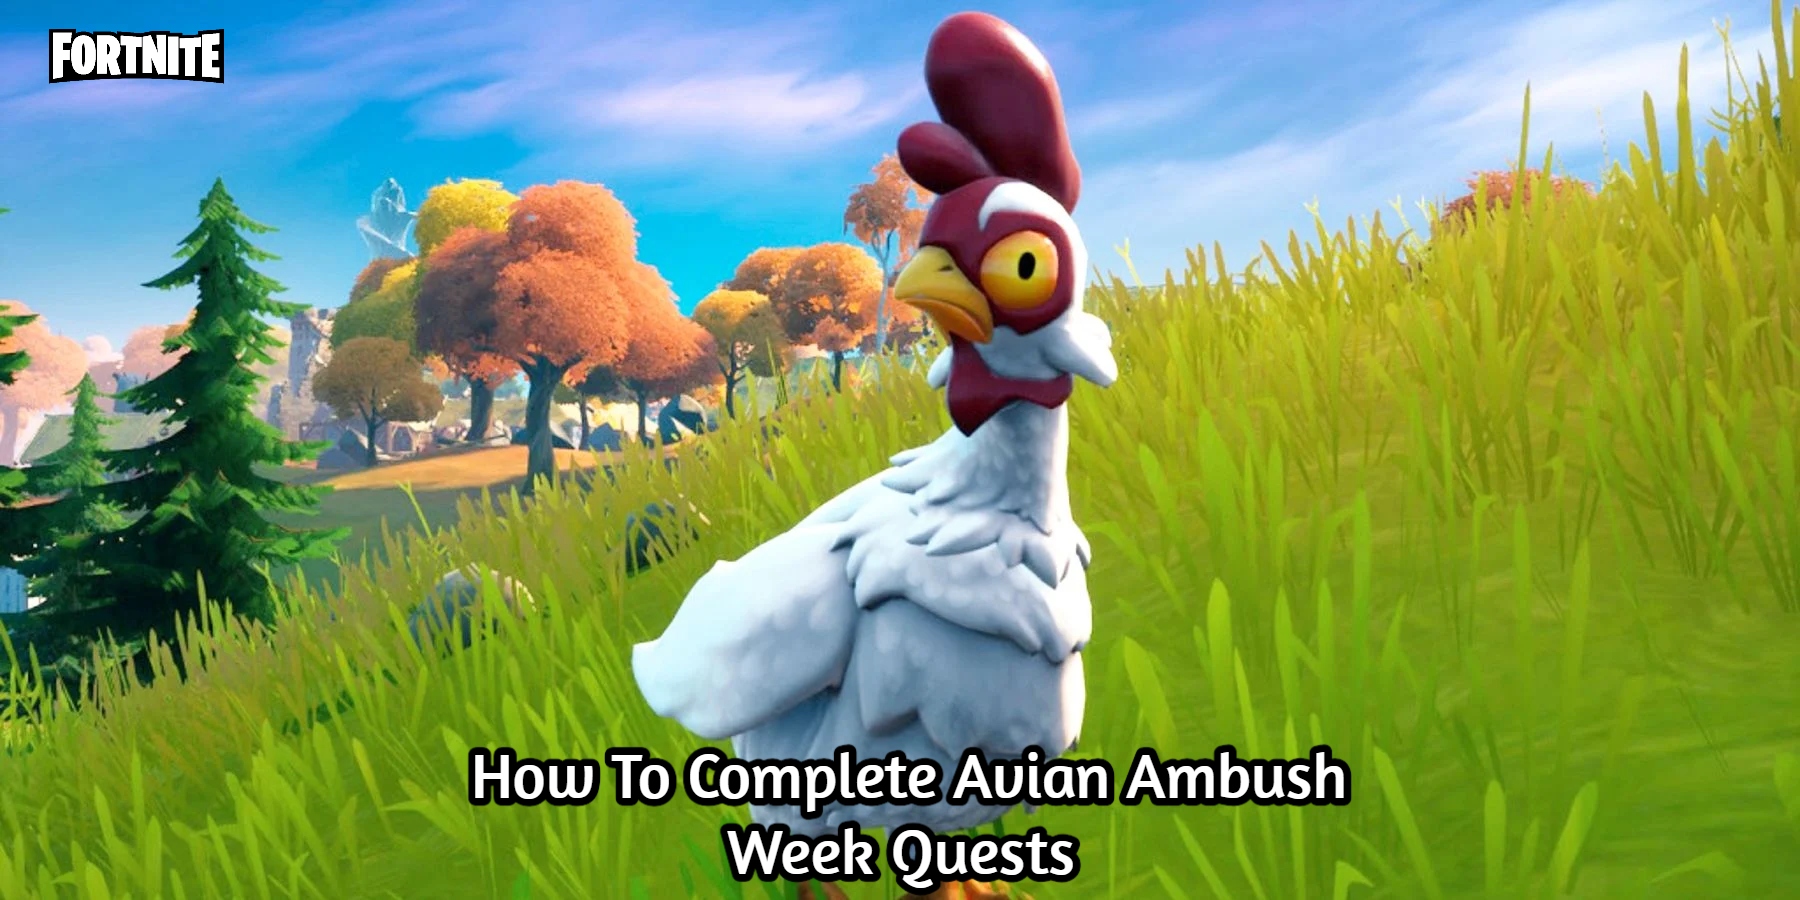 You are currently viewing How To Complete Avian Ambush Week Quests In Fortnite